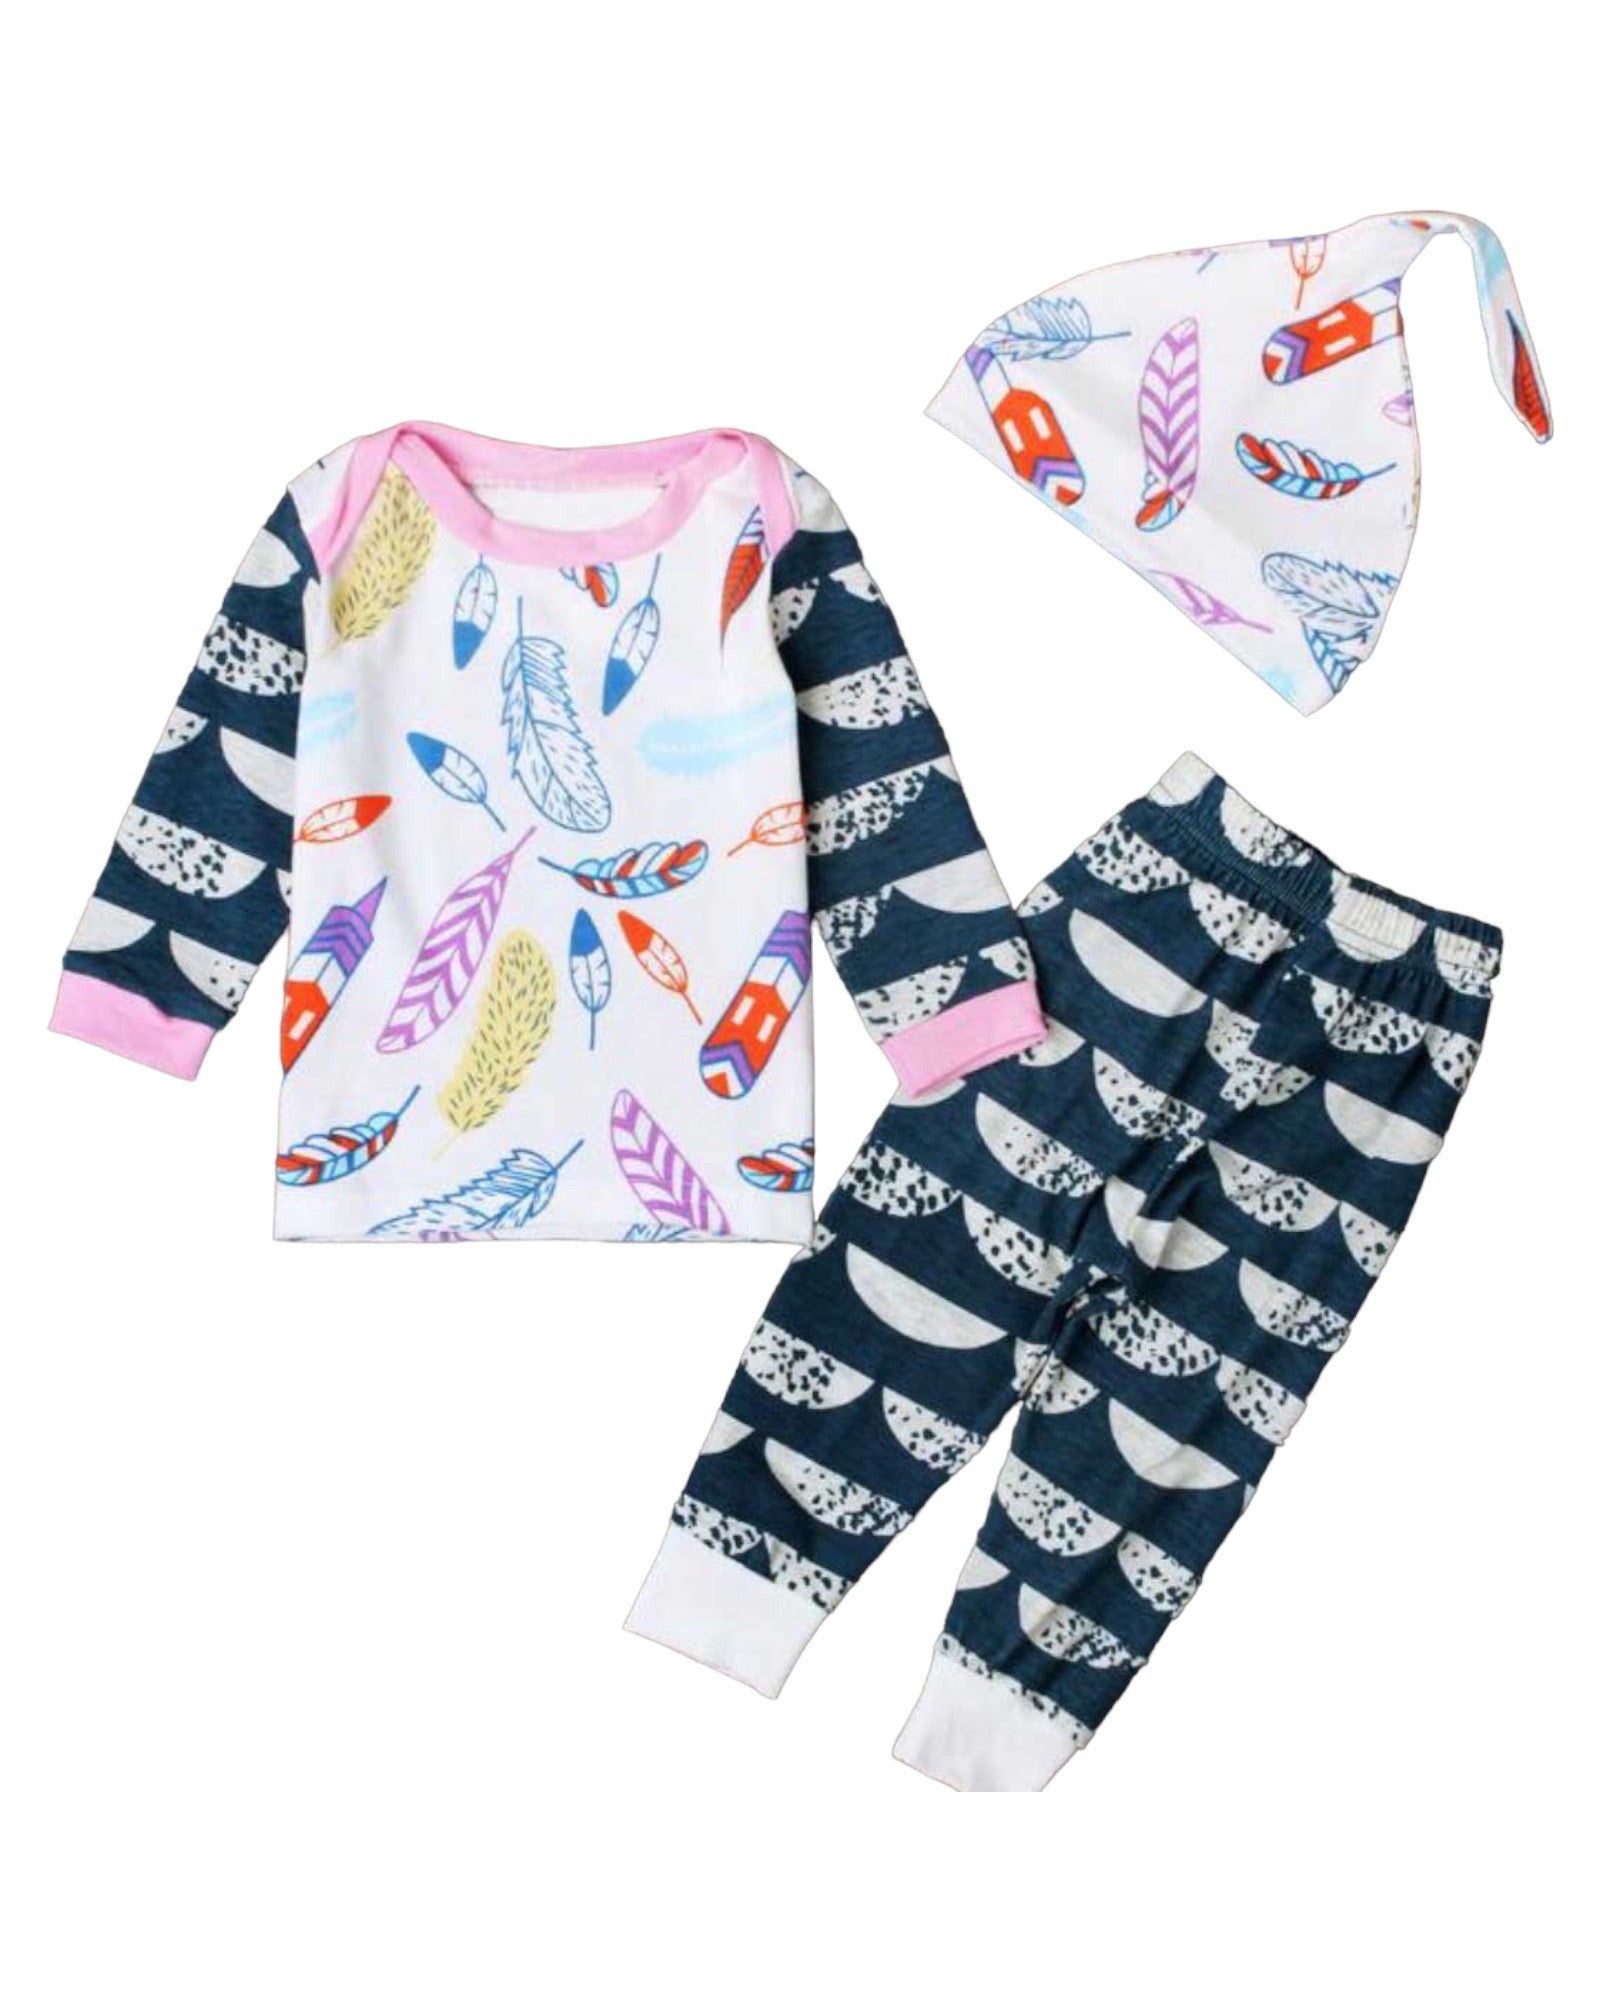 Feathers And Stripes 3 Pc Jammy Set.